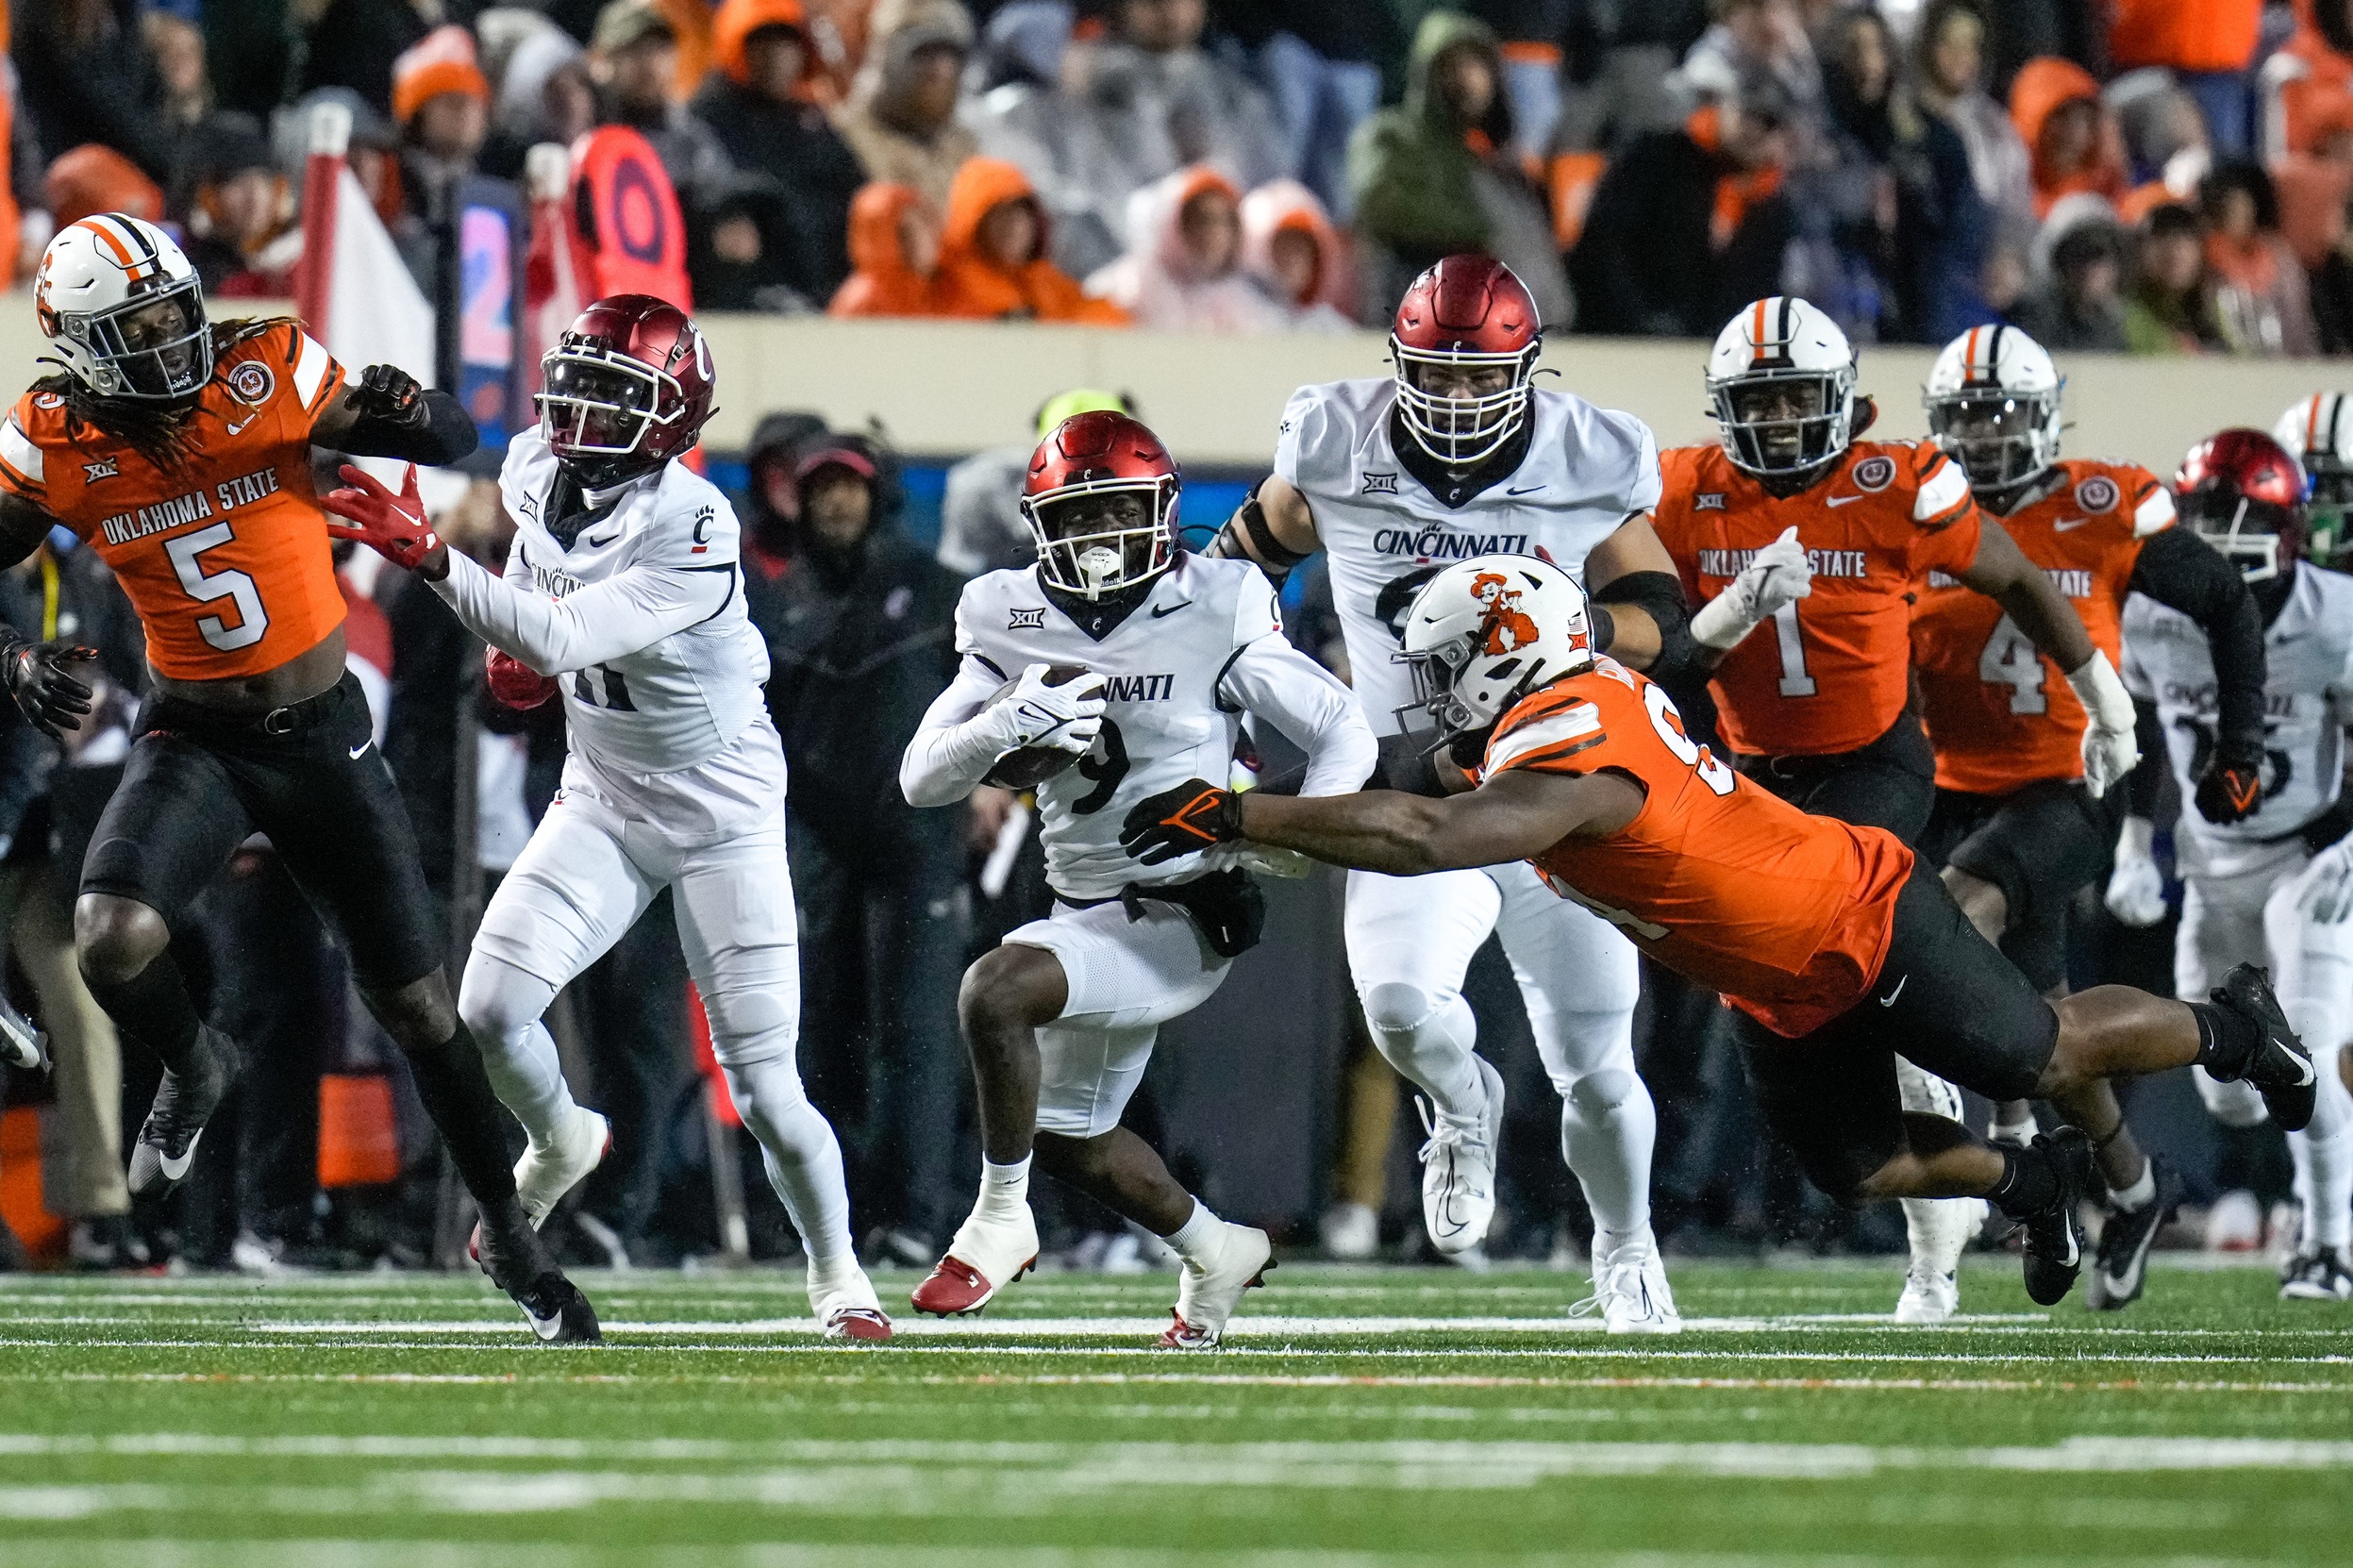 Cincinnati made it six straight with another loss on Saturday night to Oklahoma State. The offense was stale, and the defense was not itself.